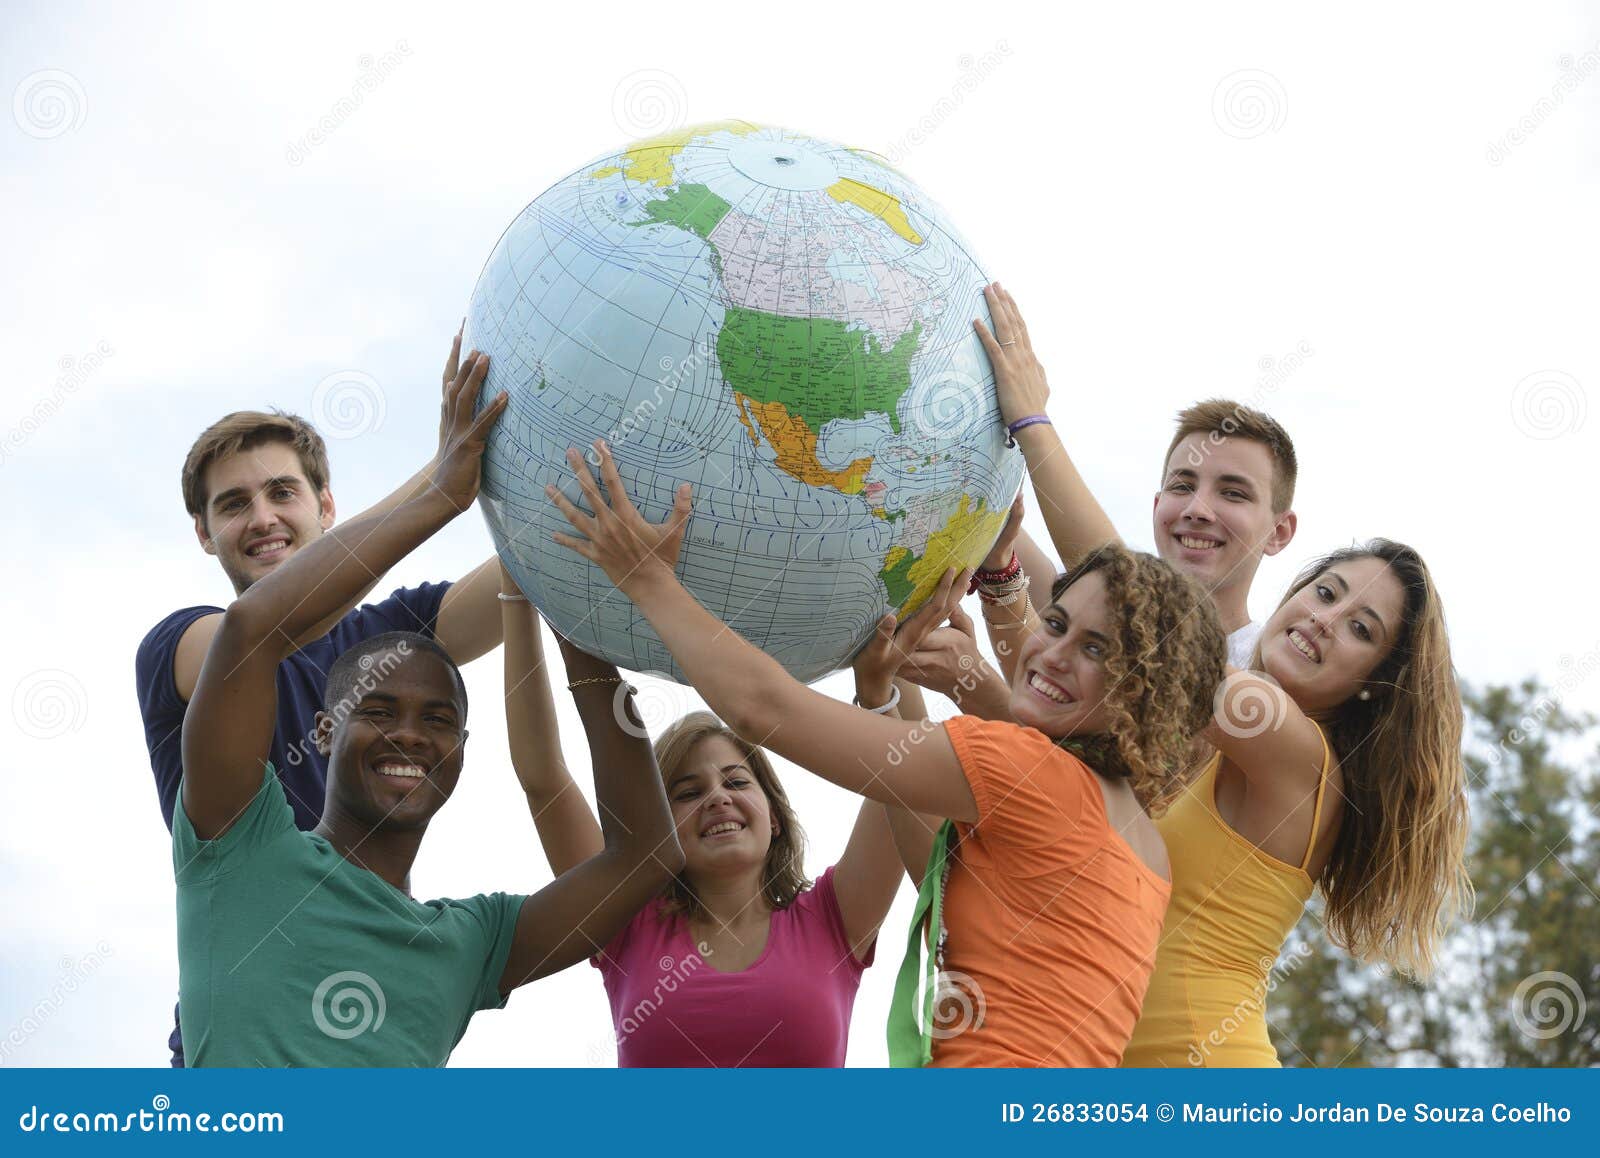 group of young people holding a globe earth